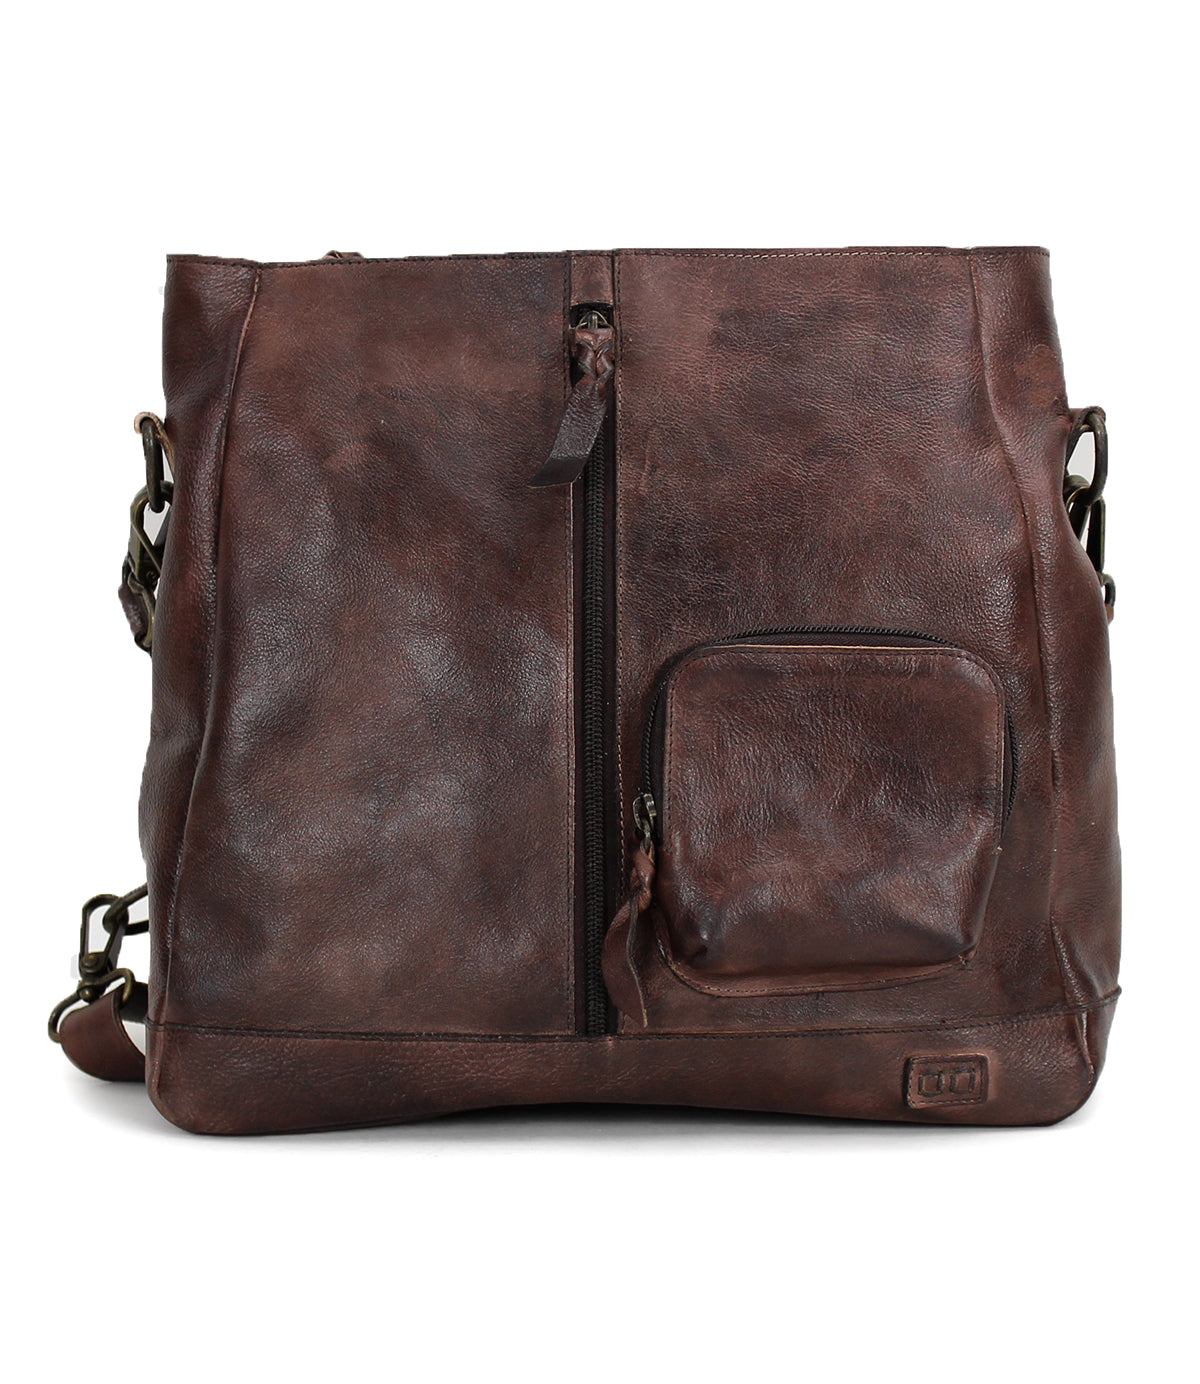 A Cirdan by Bed Stu brown leather bag with a zippered compartment.